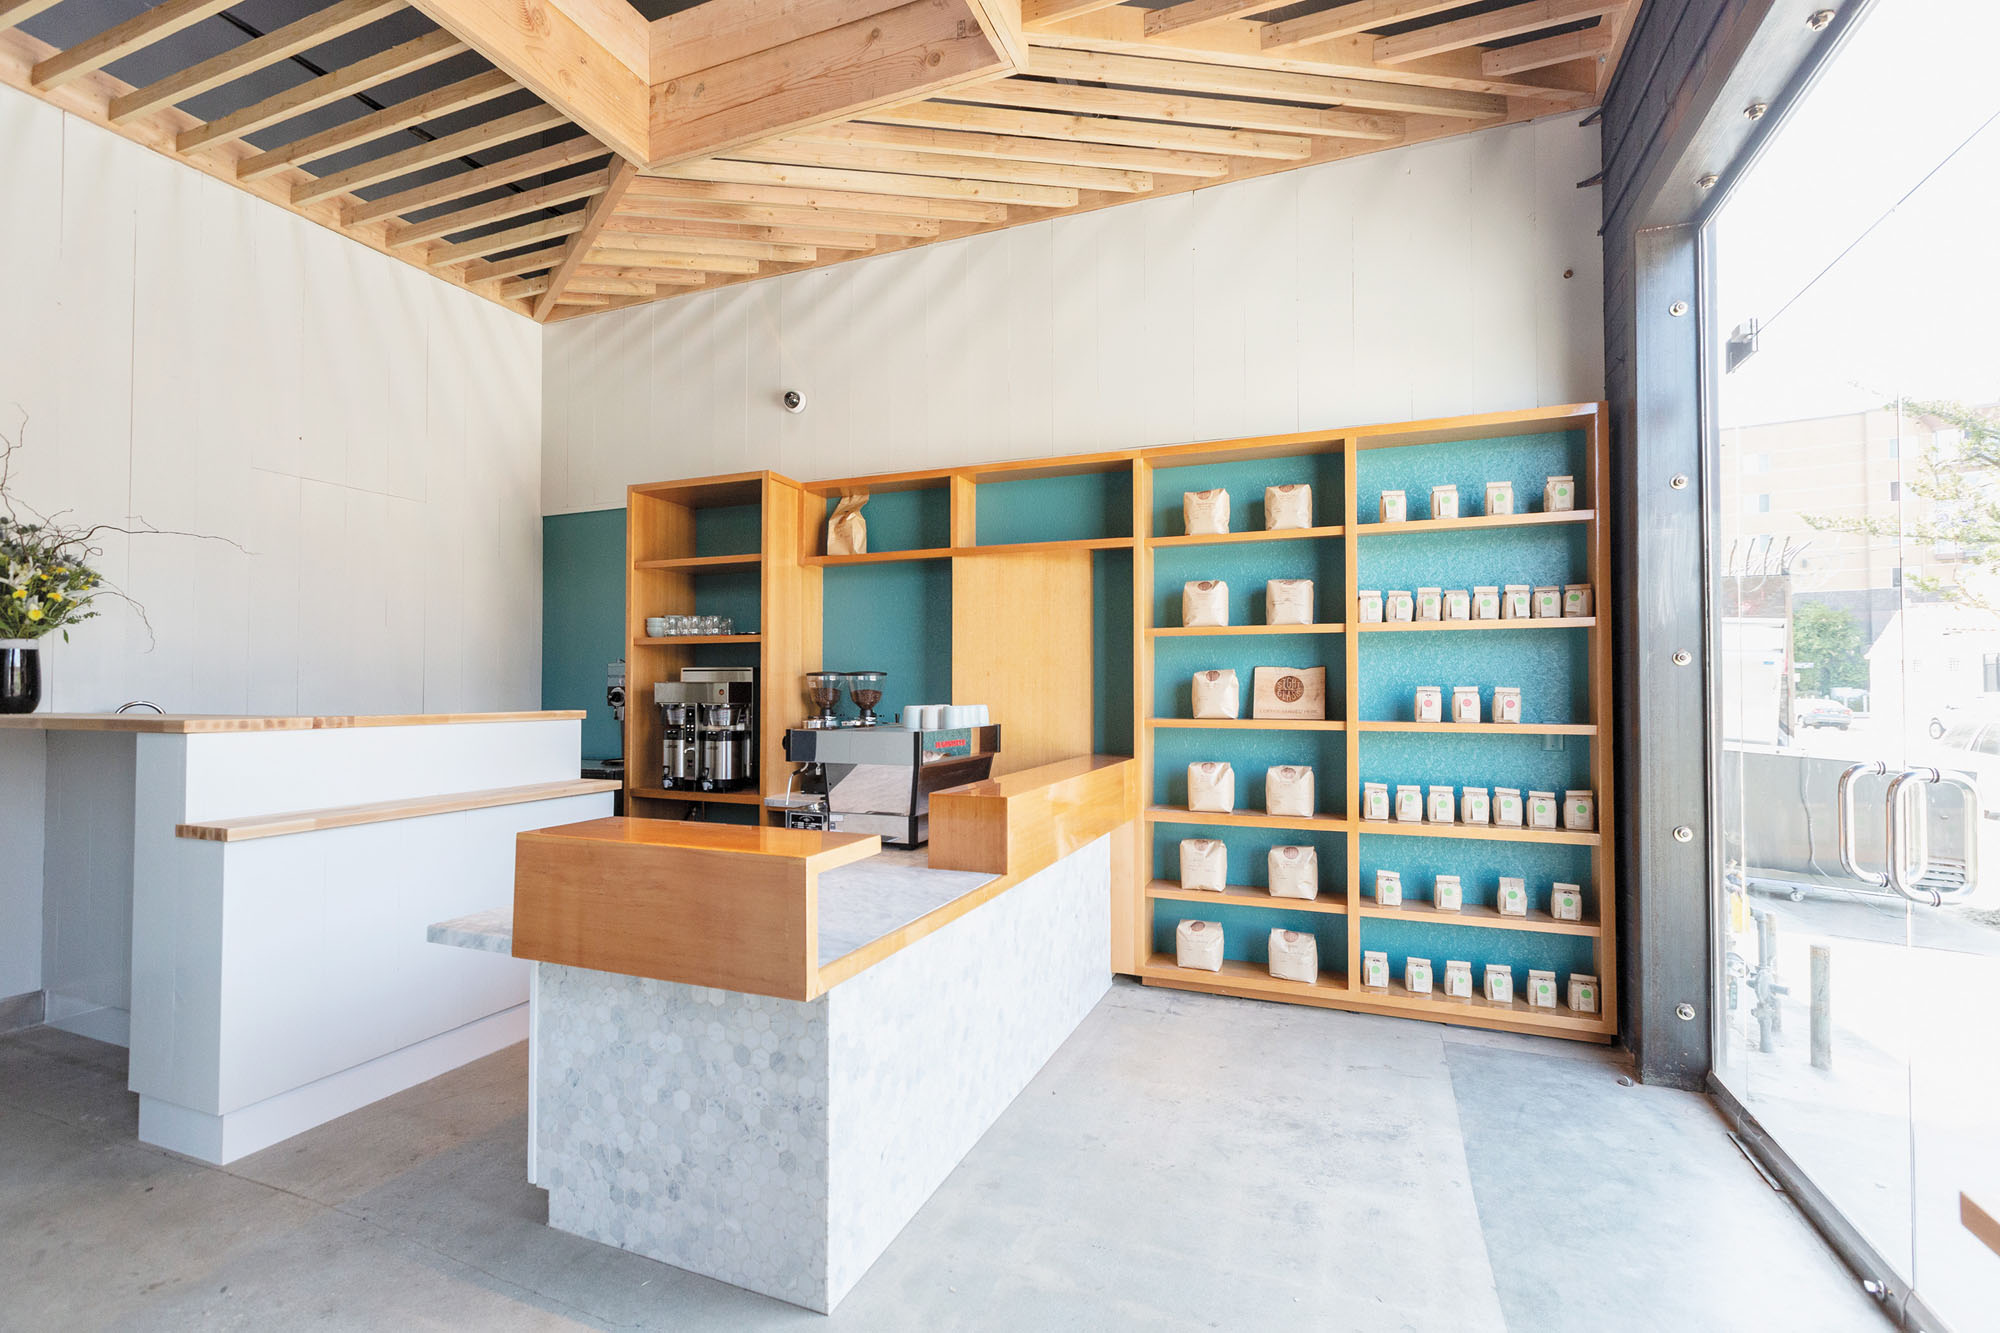 A photograph of the interior of a coffee shop with a tile bar and wooden built-in shelving